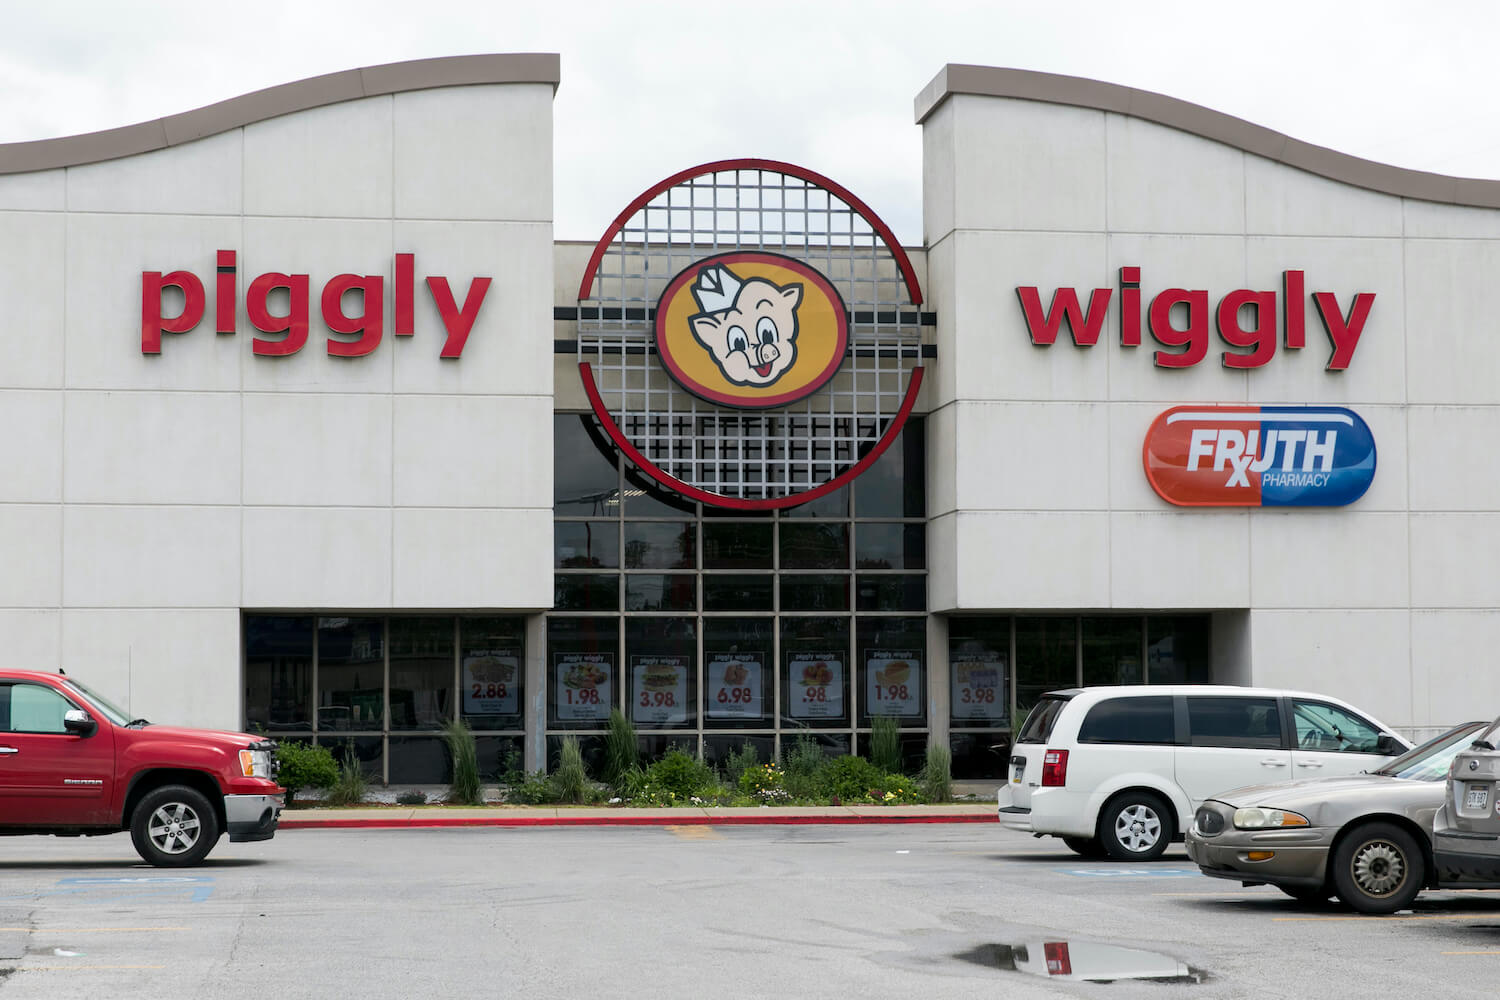 A logo sign outside of a Piggly Wiggly retail grocery store location in Charleston, West Virginia on May 29, 2020. July 2020